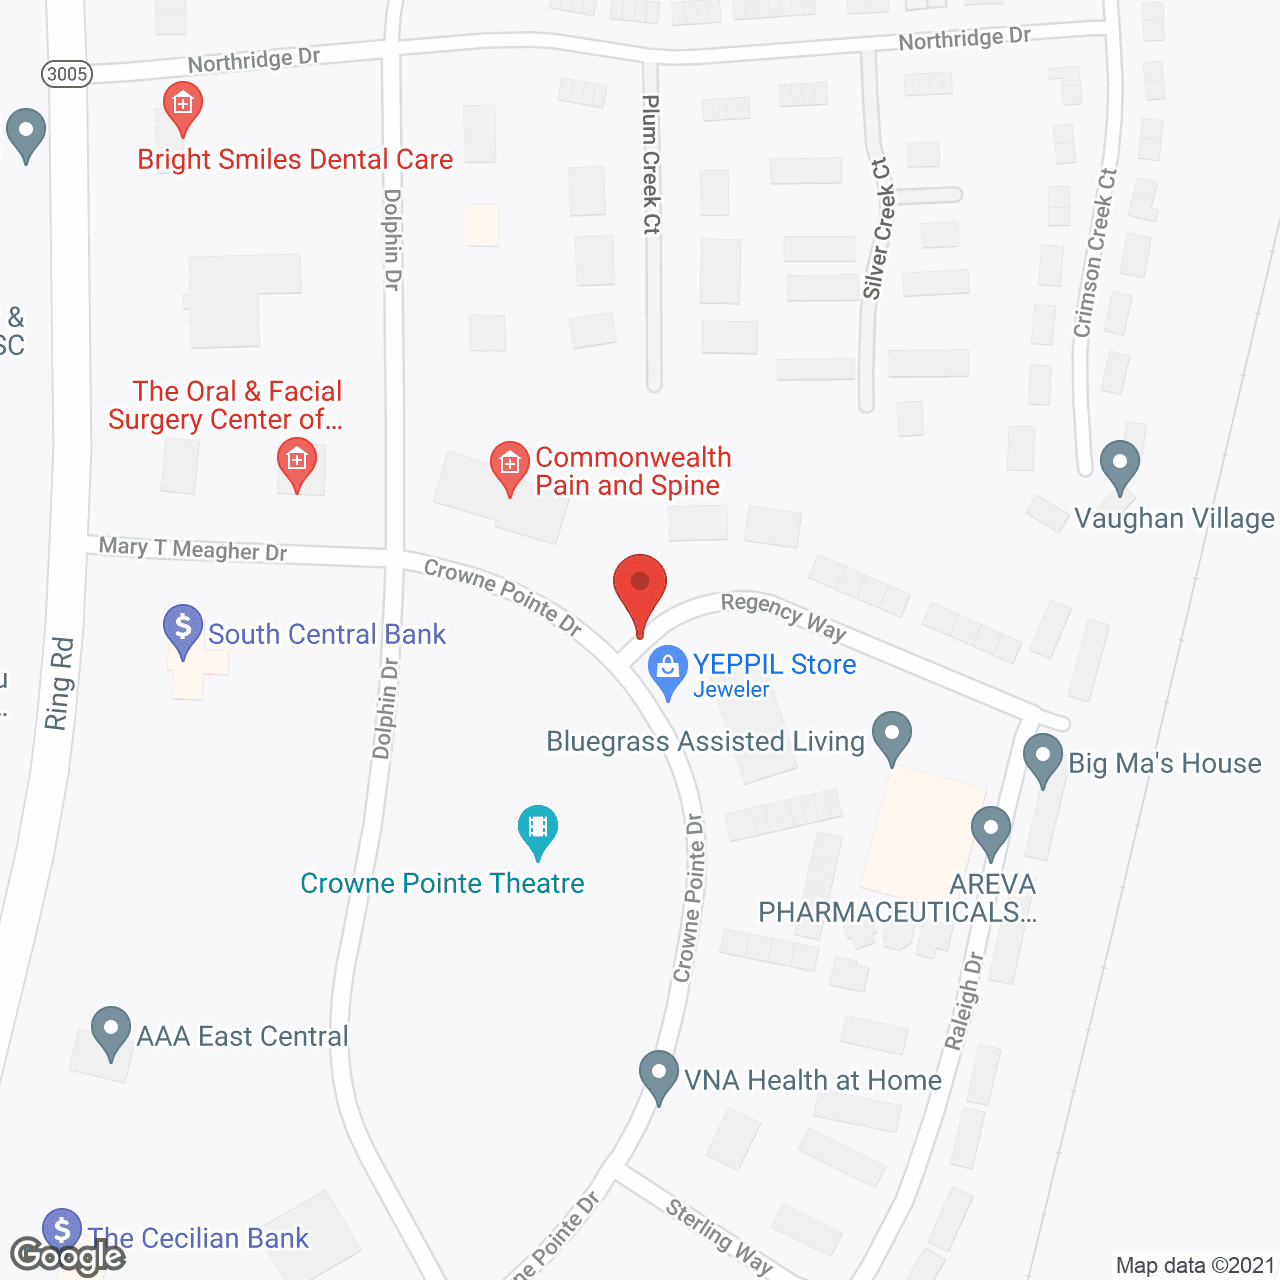 Bluegrass Assisted Living in google map